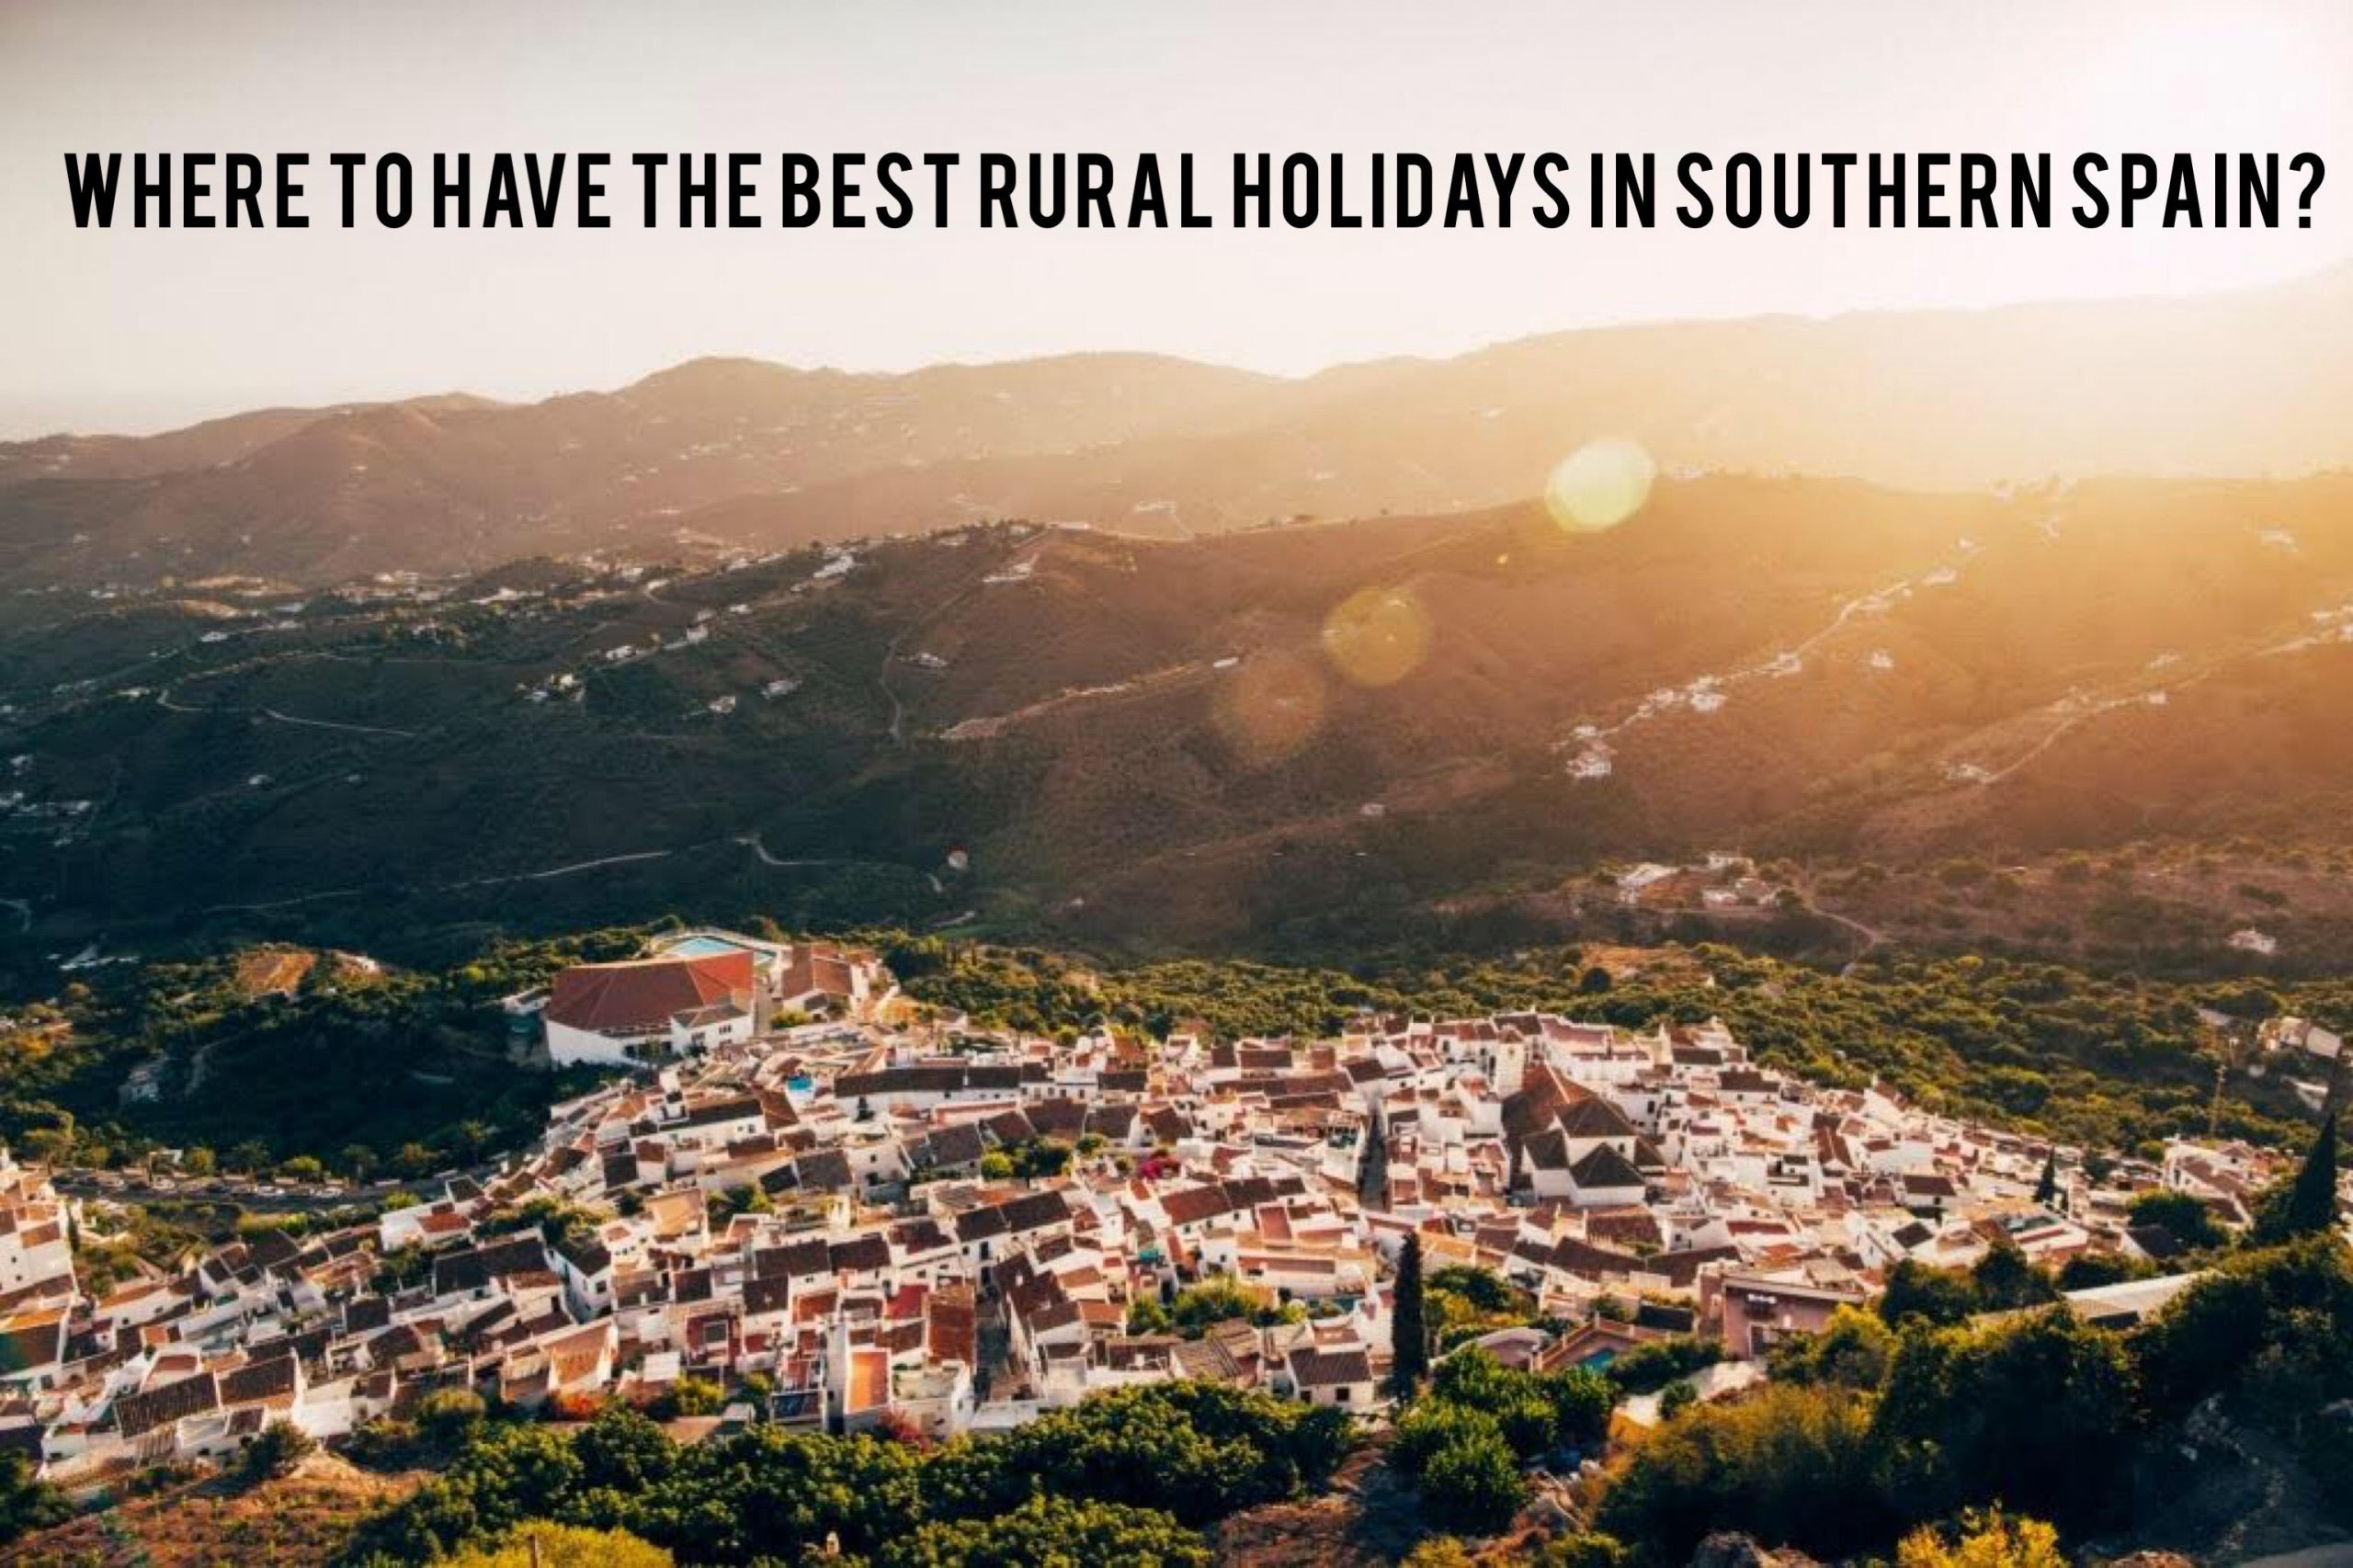 Where to have the best rural holidays in Southern Spain